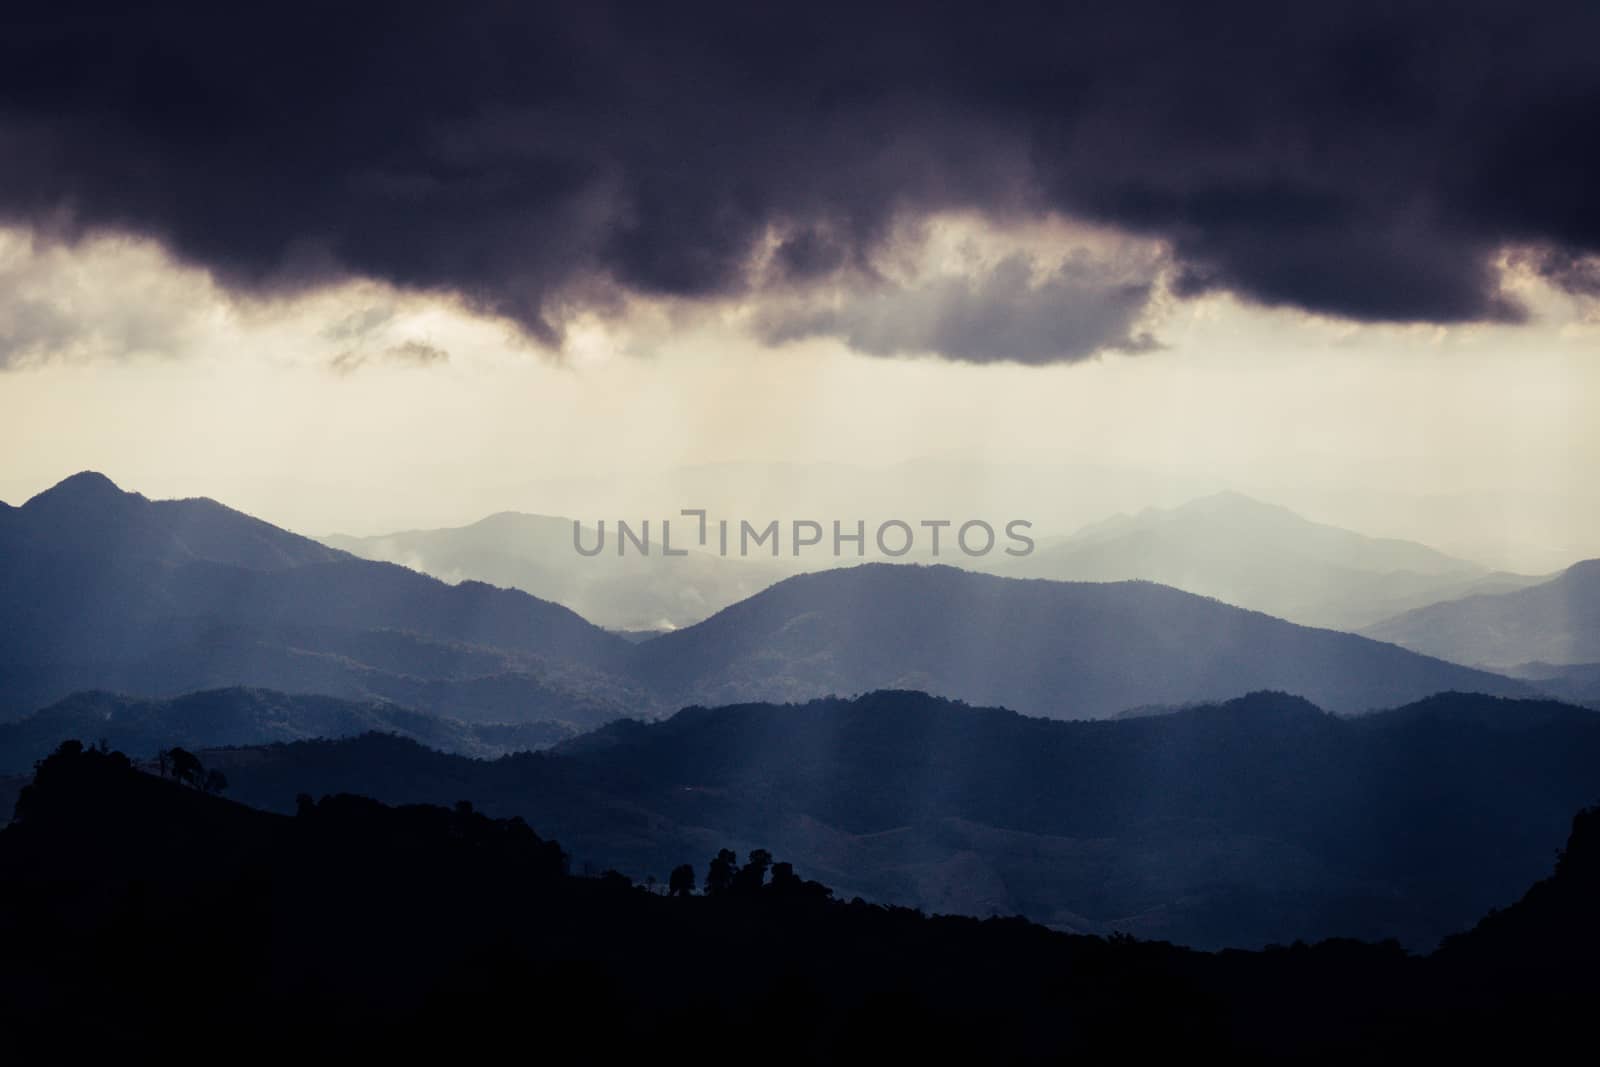 Overlapping mountains and rain clouds